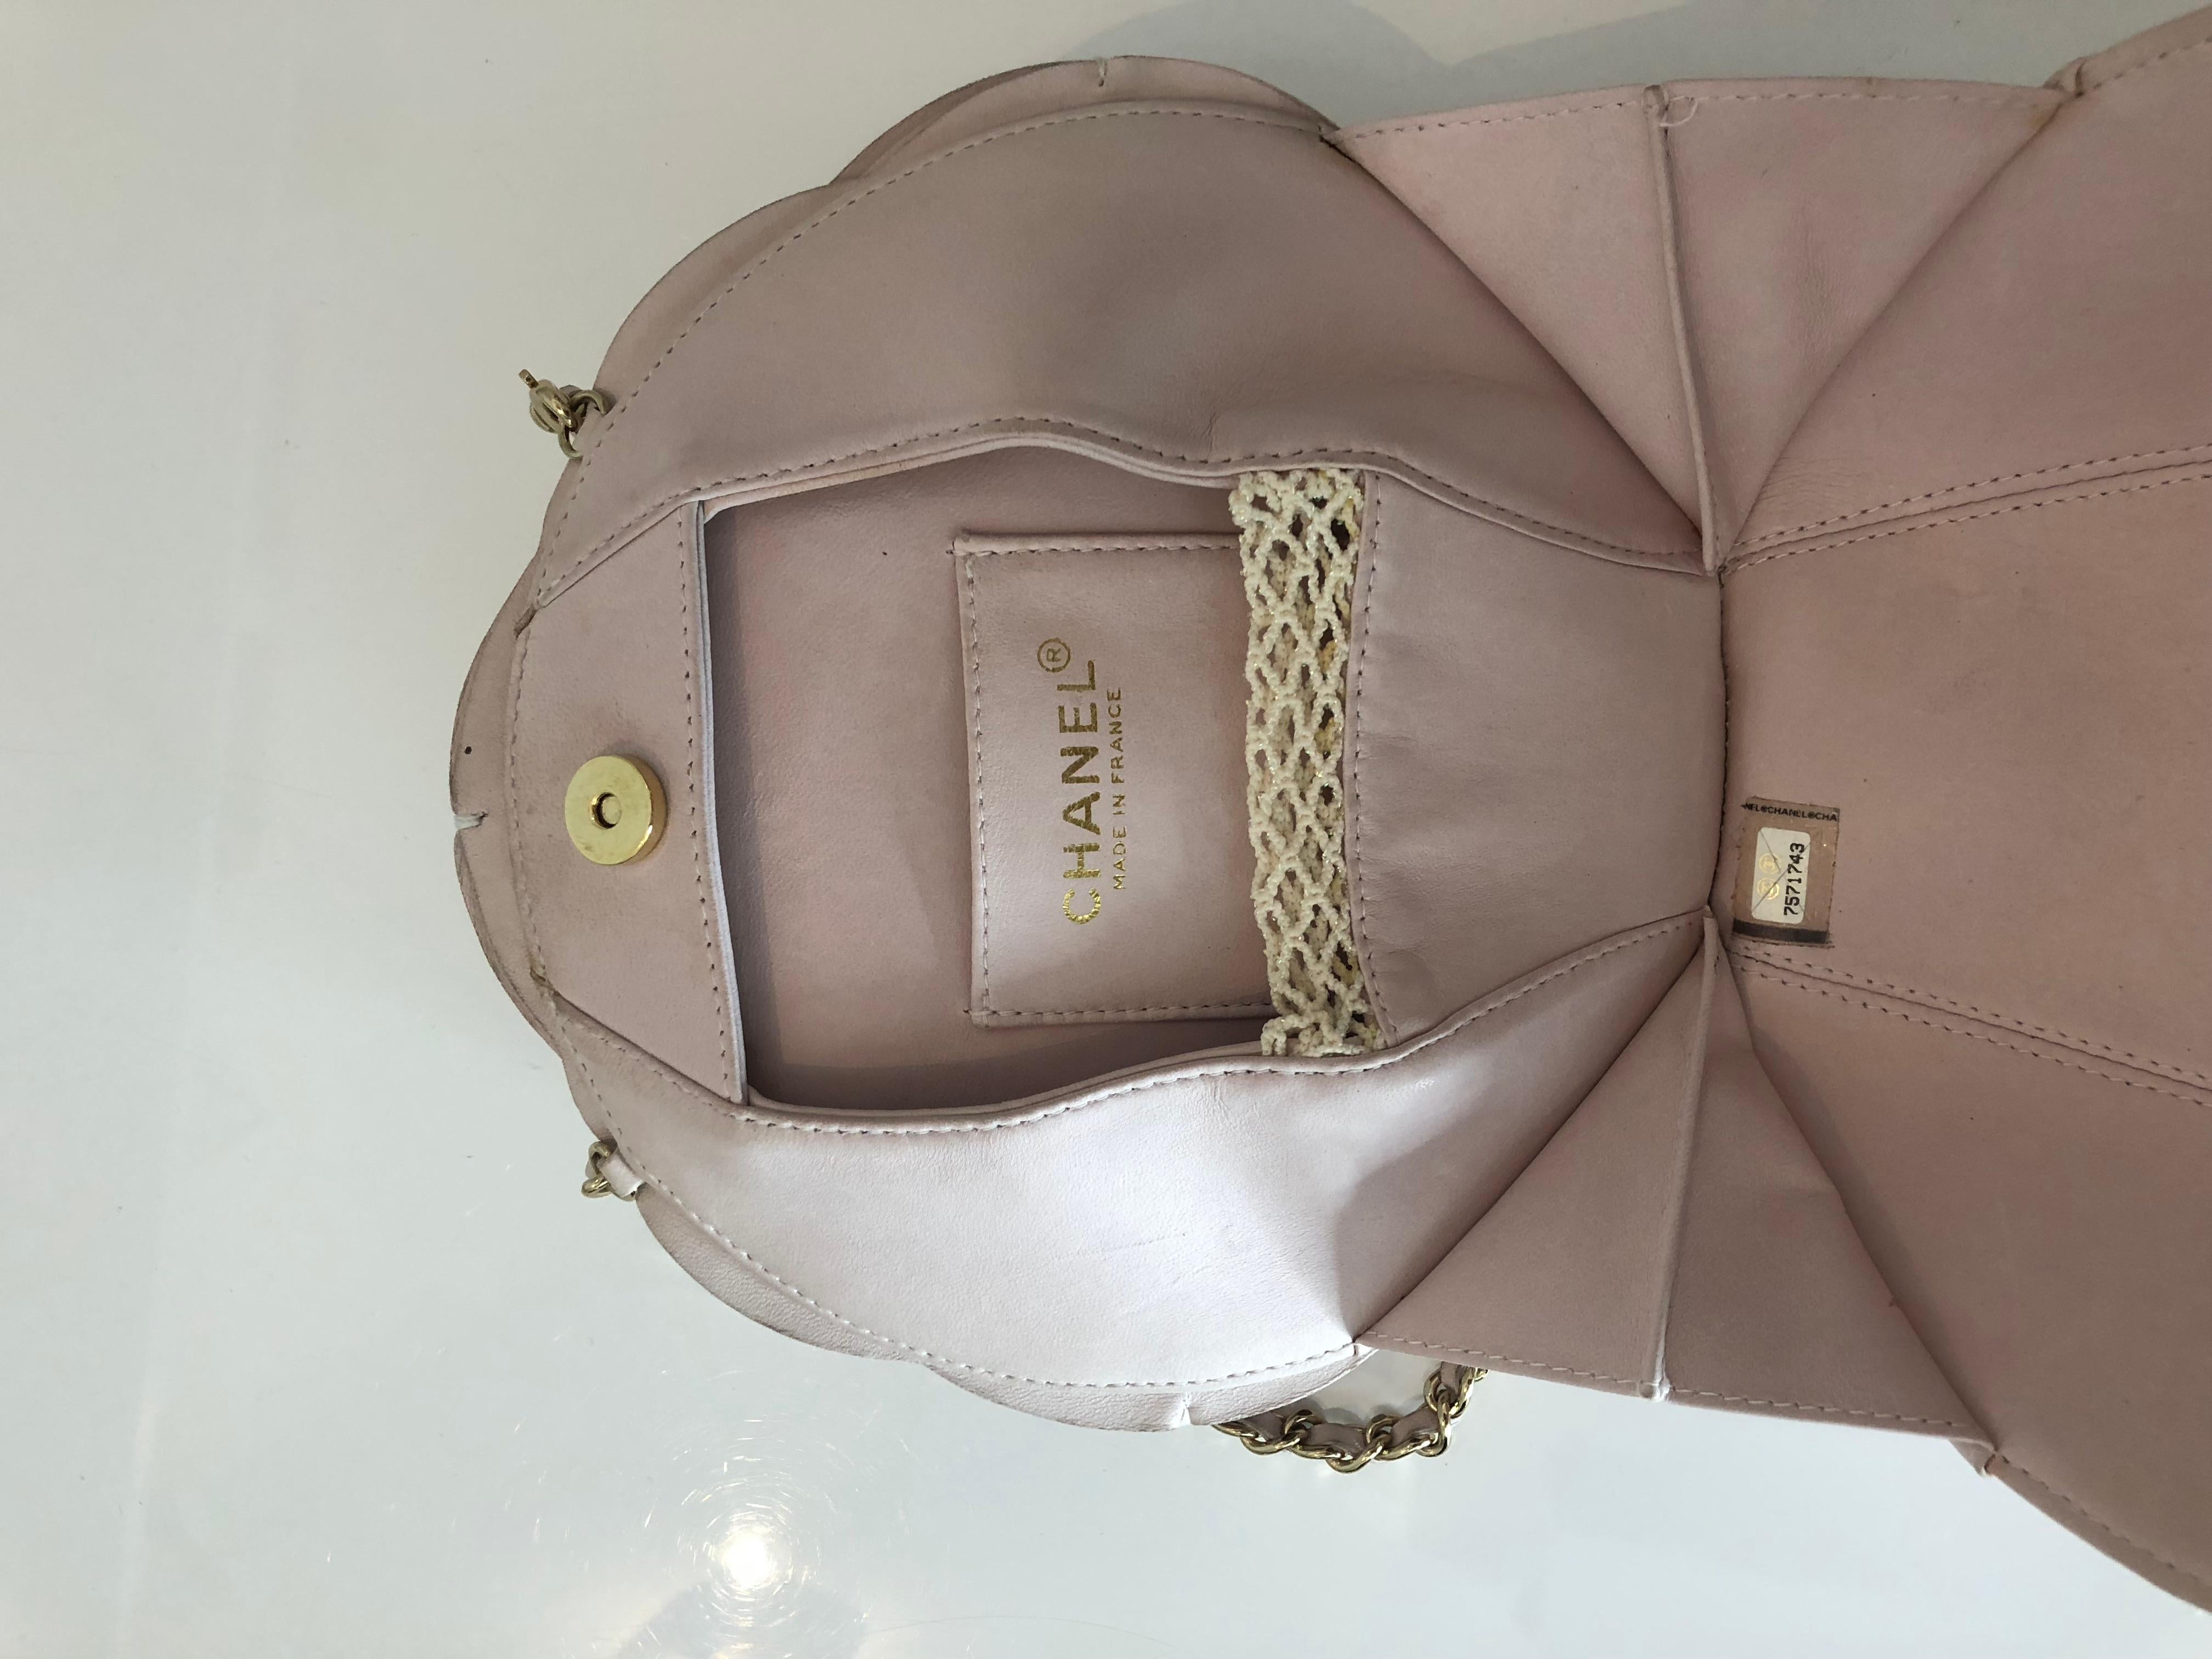 Brown 2002/2003 Chanel Blush Leather Camellia Evening Bag